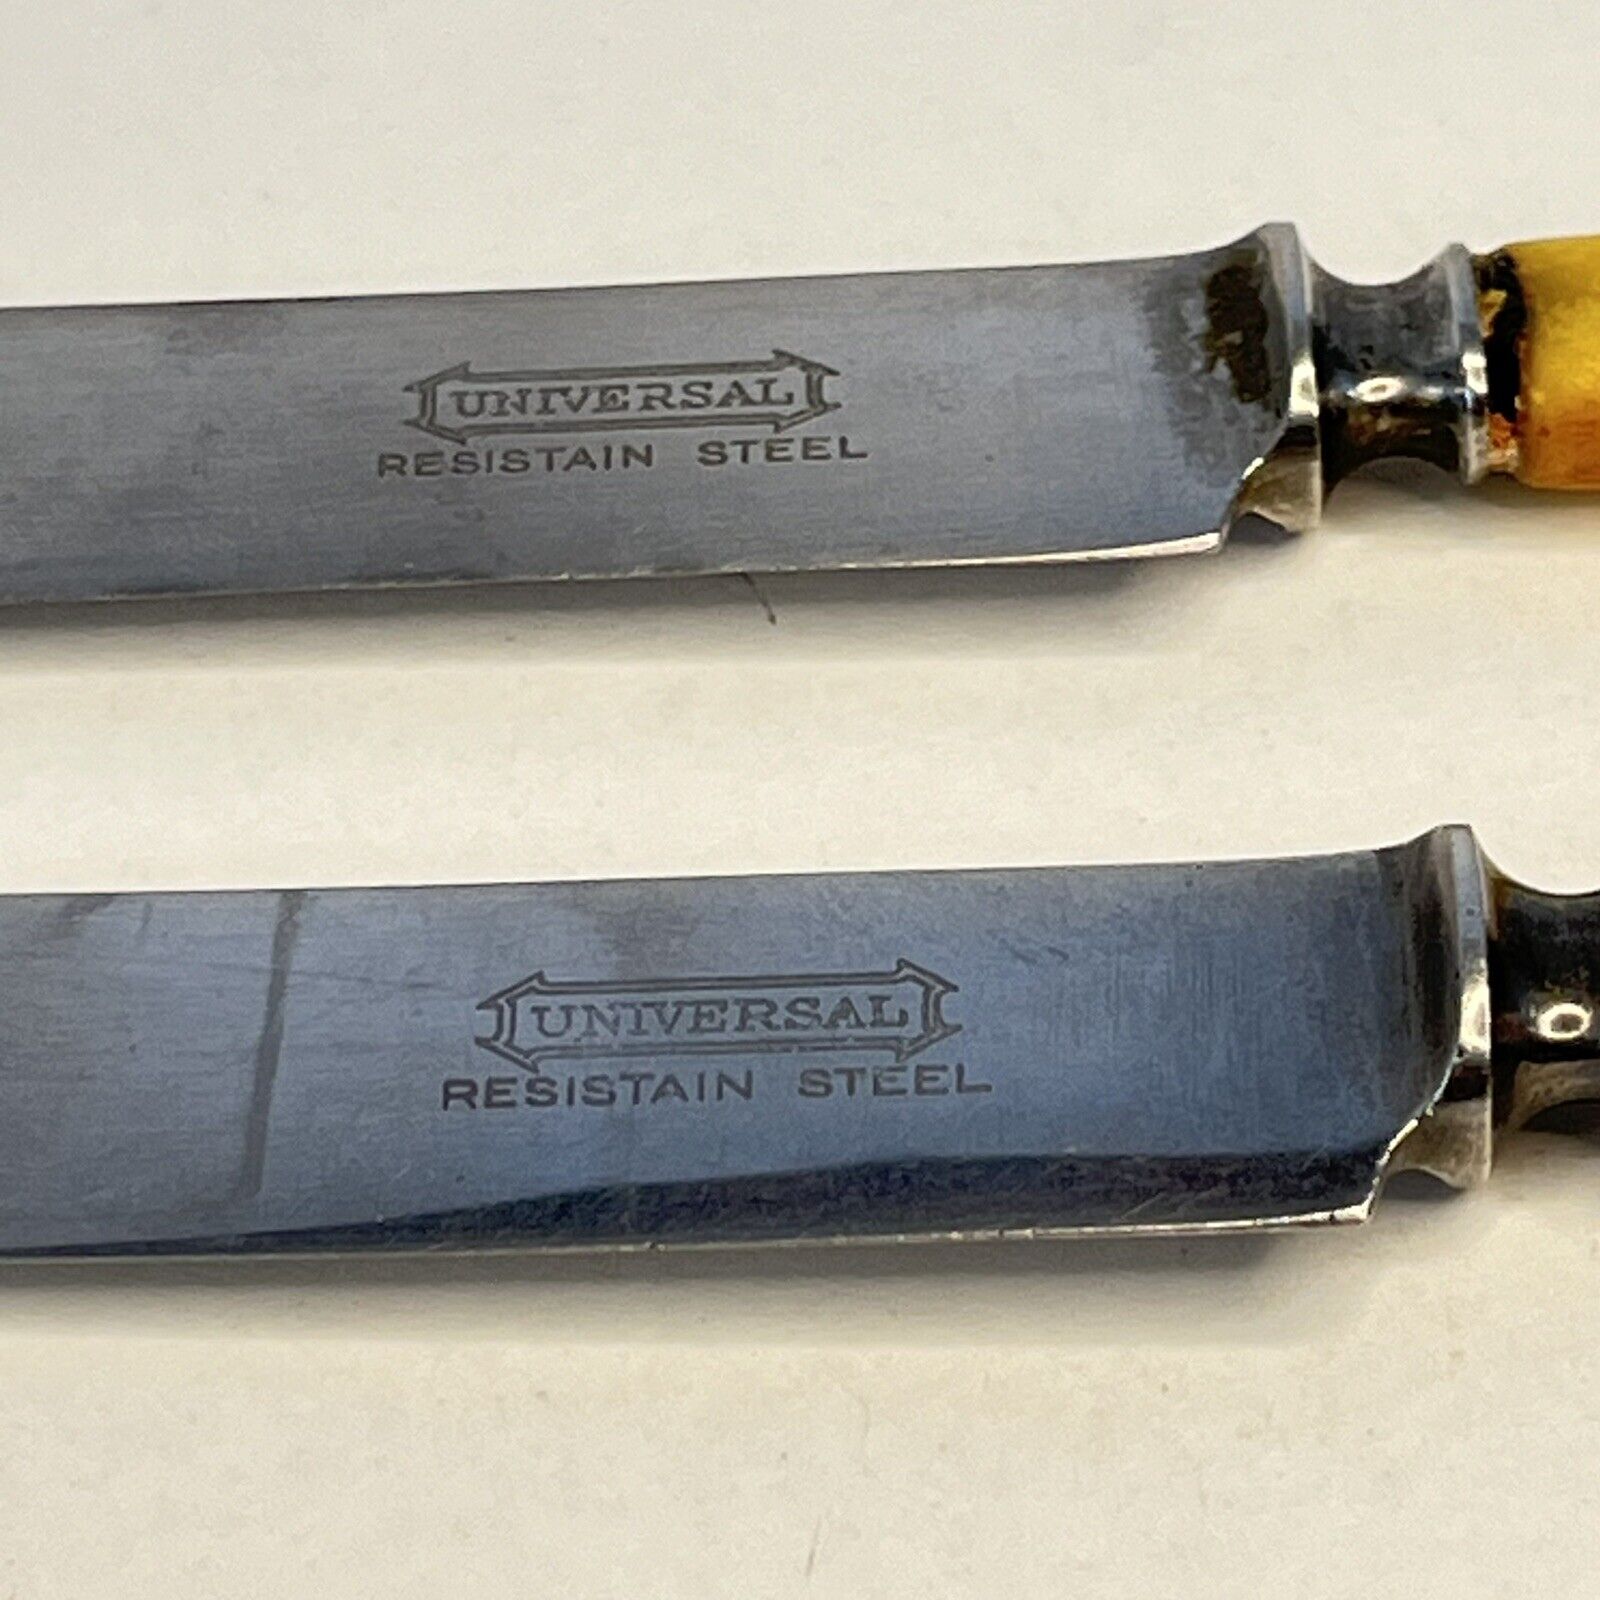 Two Antique Universal Resistain Steel Dinner Knives Flexible 5.25\